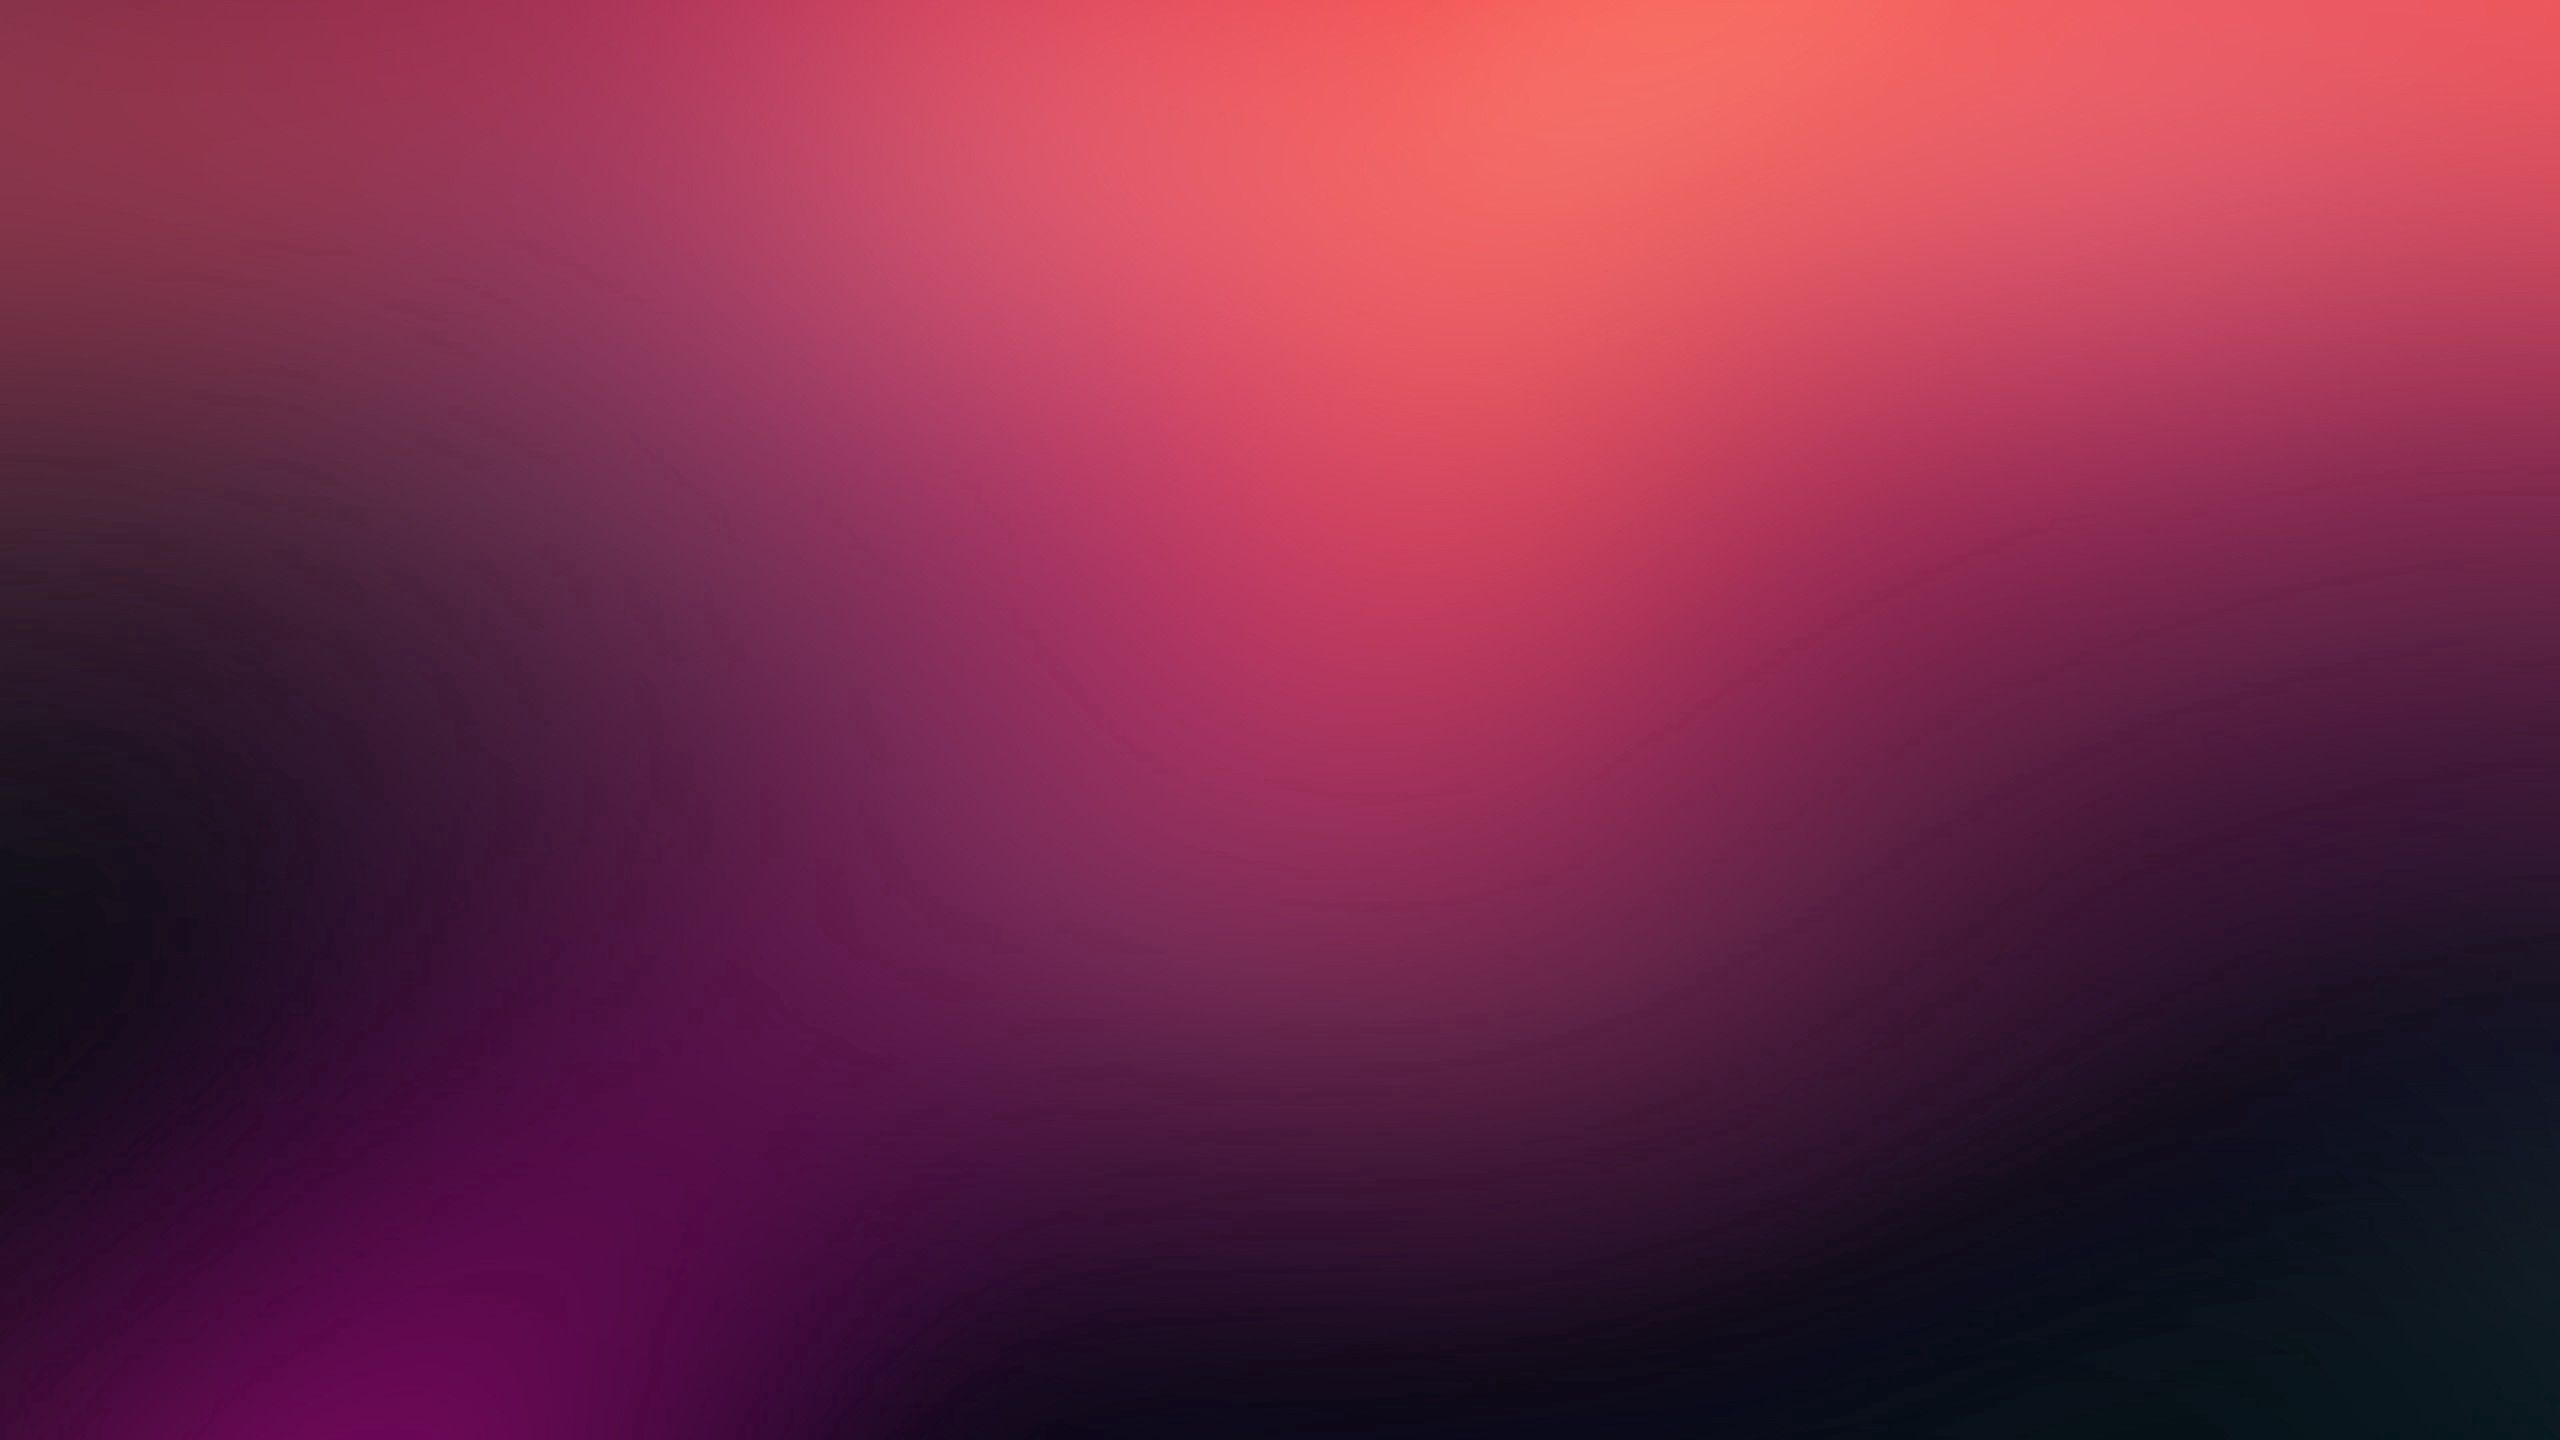 A blurred image of a pink and purple background - 2560x1440